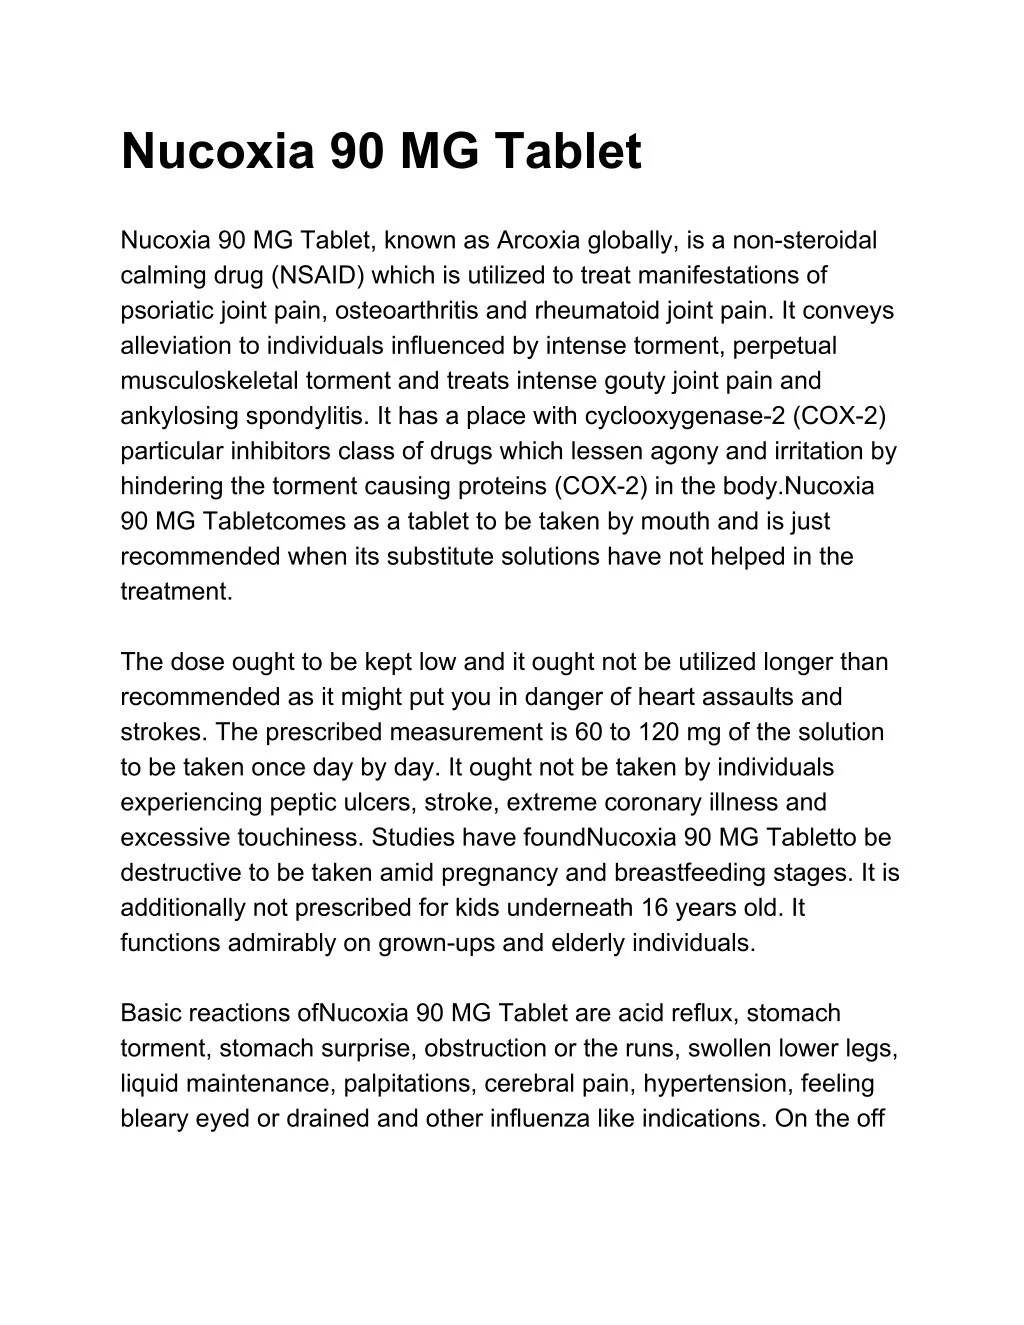 nucoxia 90 mg tablet nucoxia 90 mg tablet known